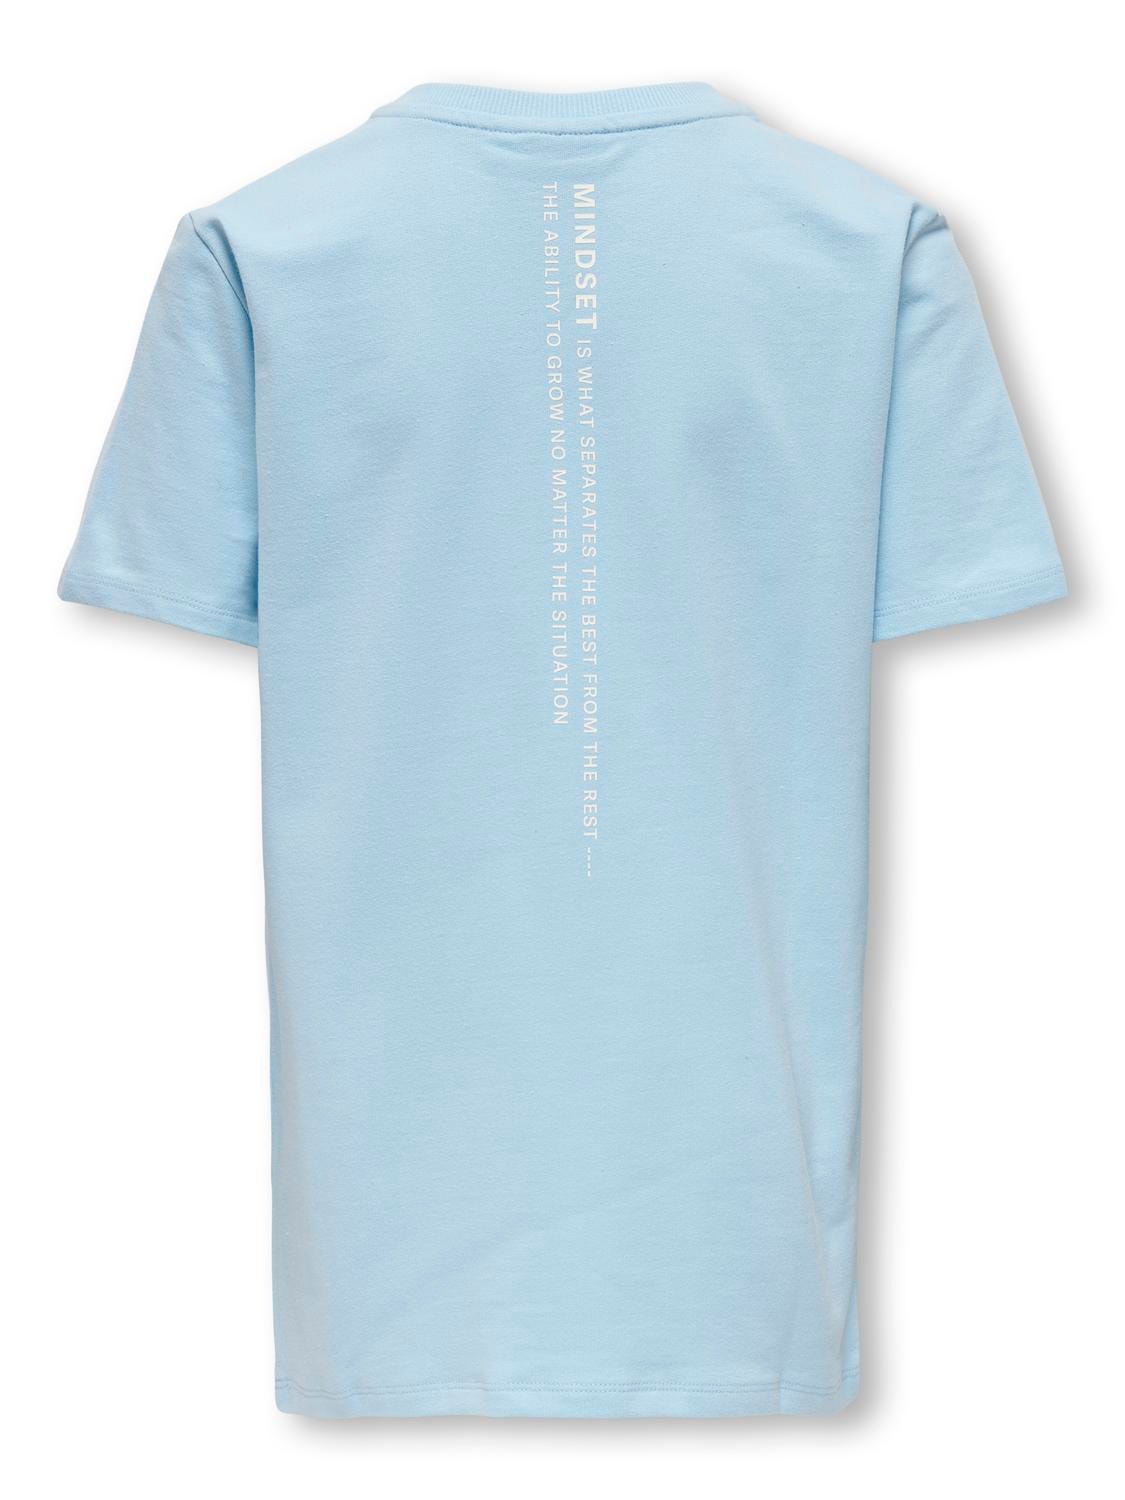 ONLY O-neck t-shirt -Clear Sky - 15321711